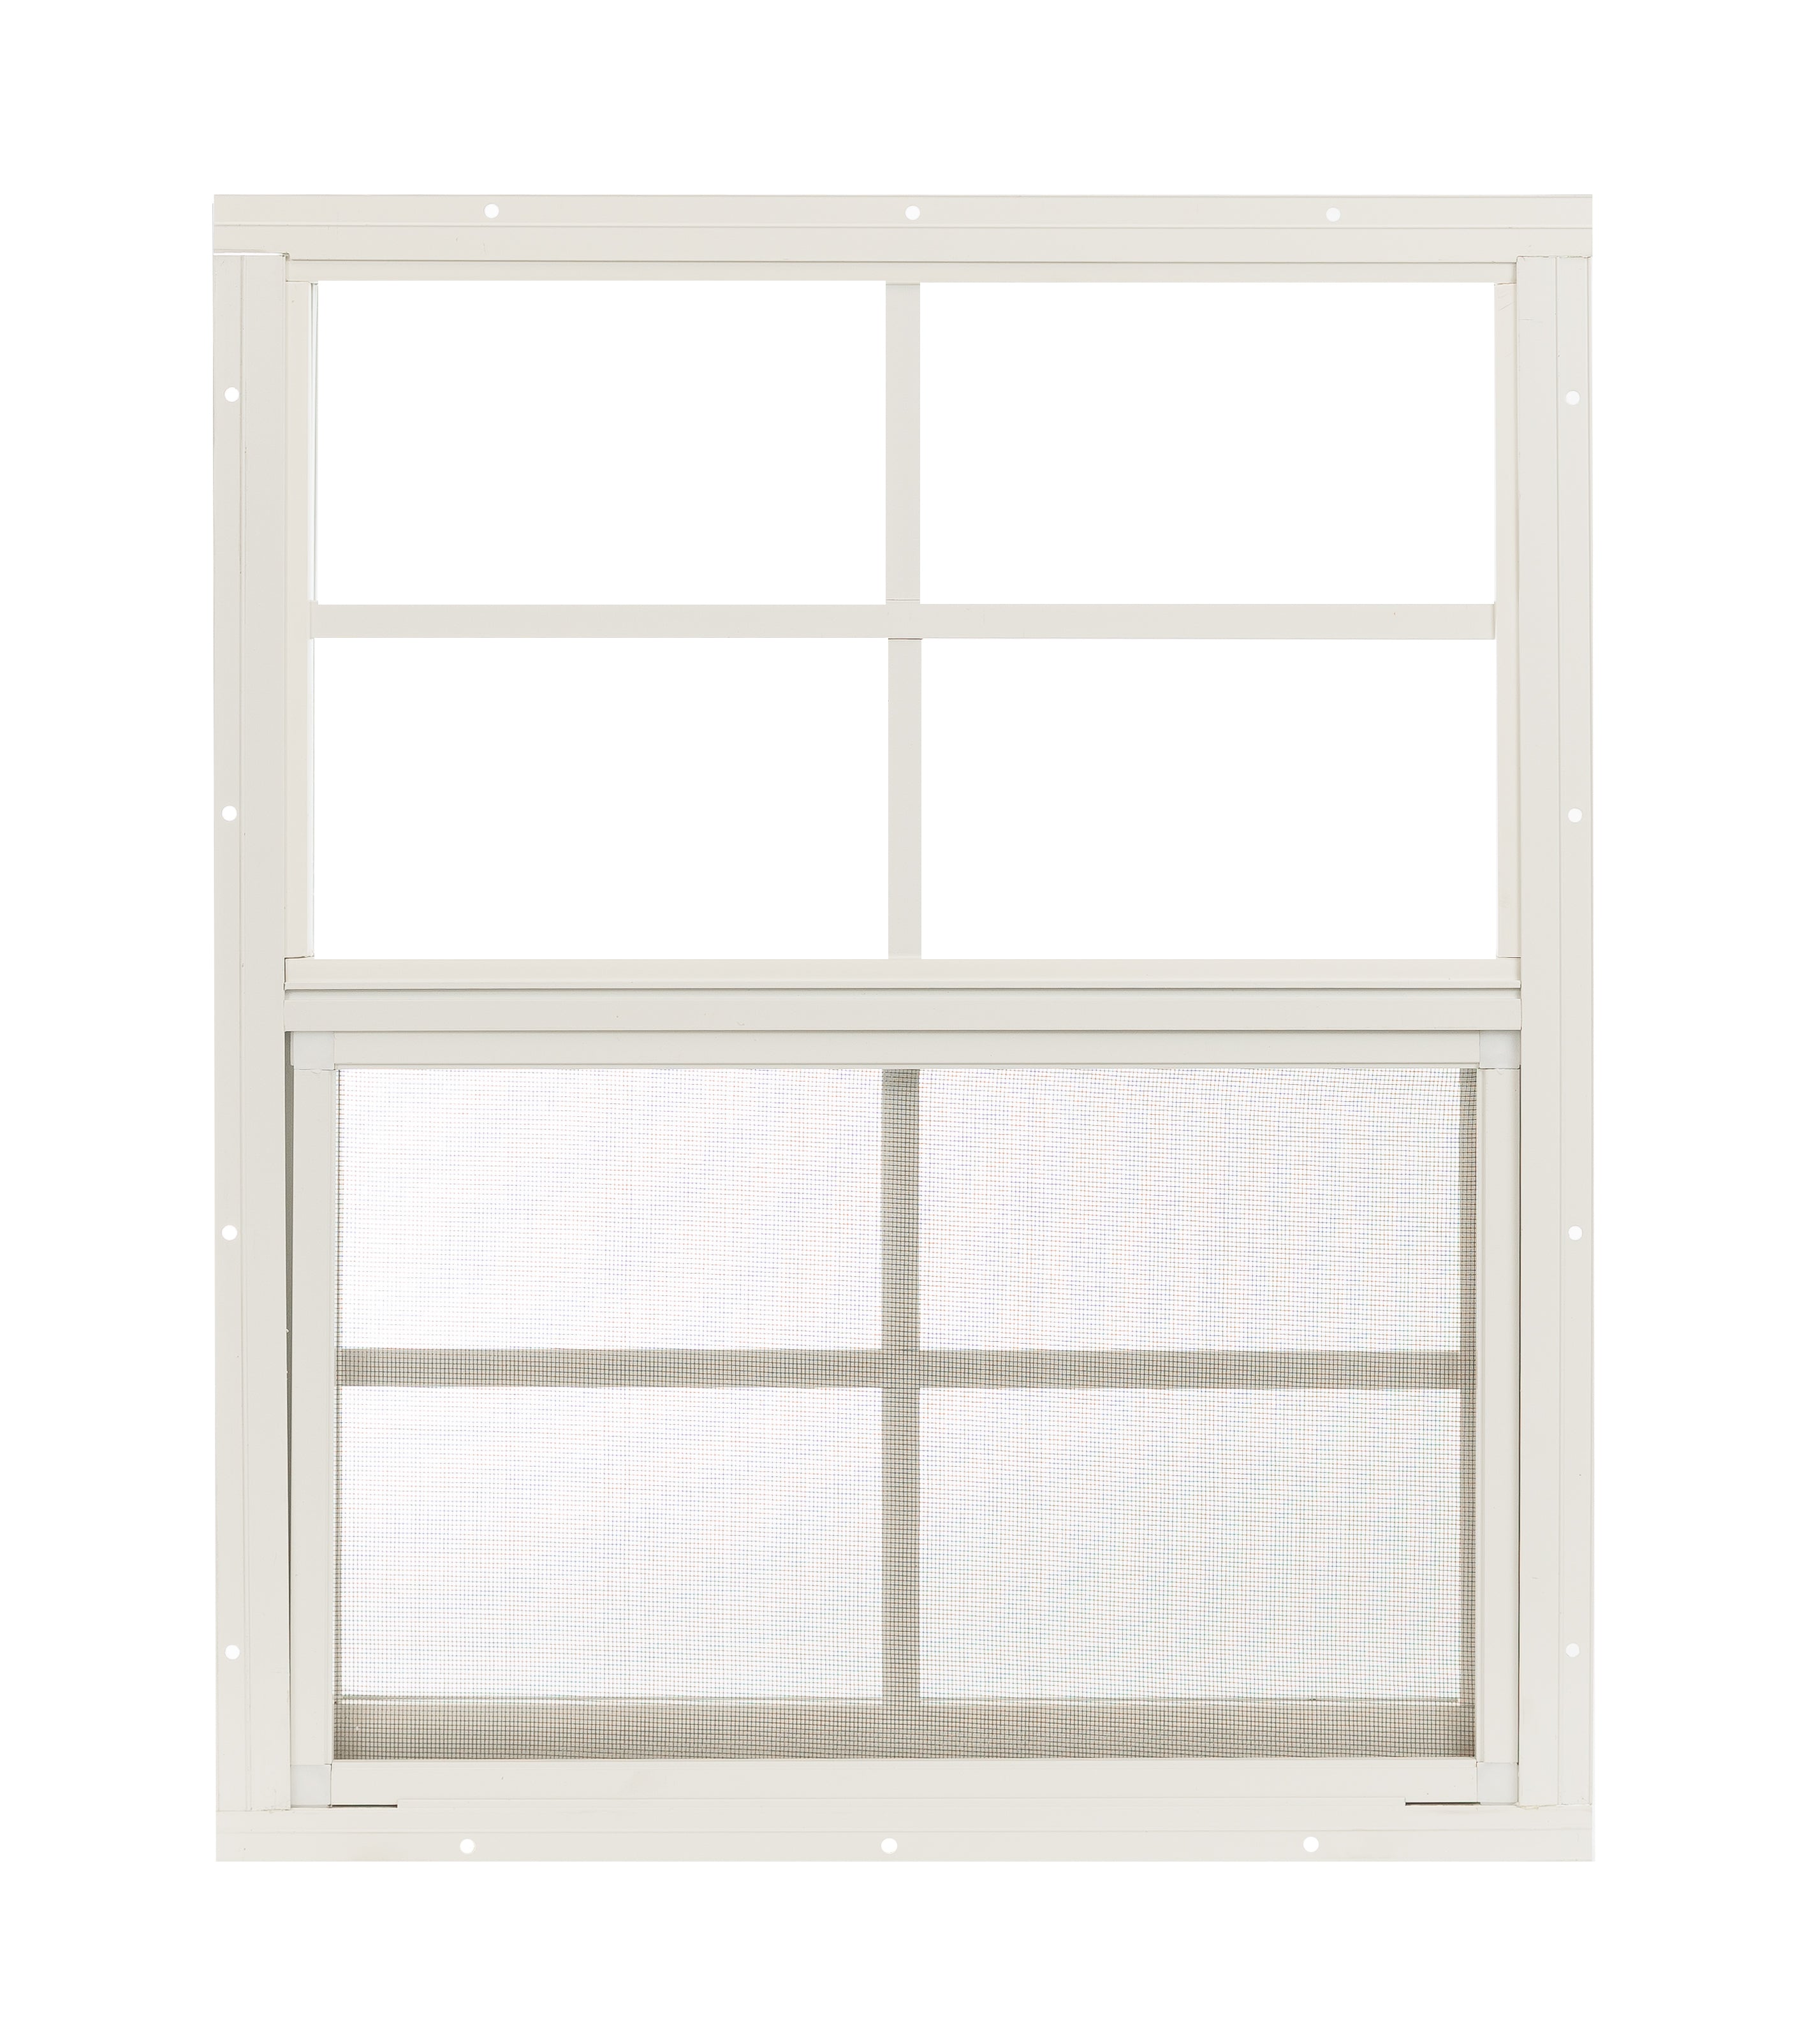 18" W x 23" H Single Hung Flush Mount White Window for Sheds, Playhouses, and MORE